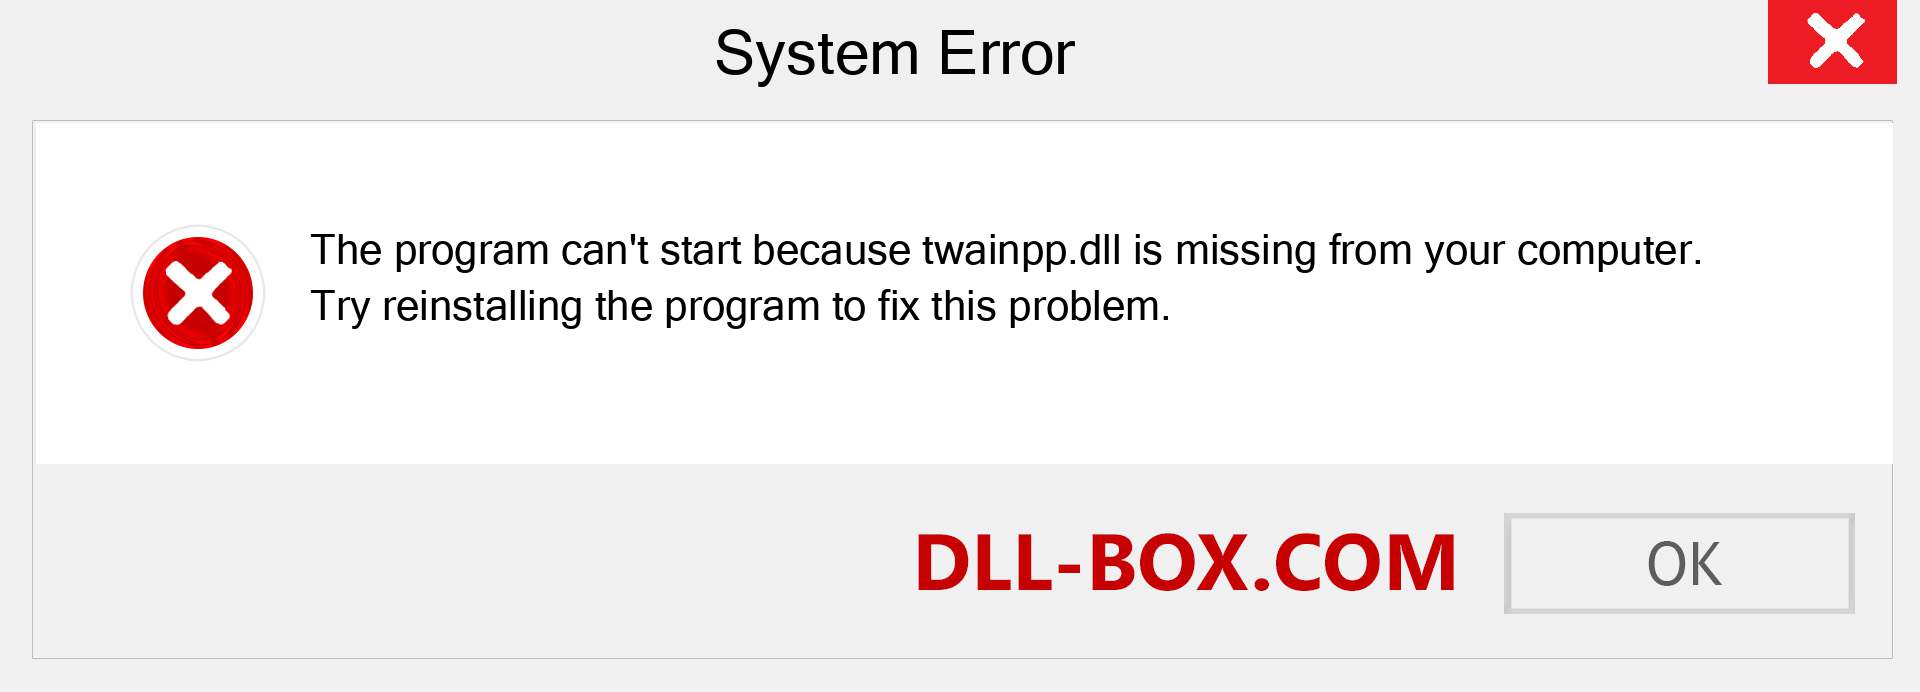  twainpp.dll file is missing?. Download for Windows 7, 8, 10 - Fix  twainpp dll Missing Error on Windows, photos, images